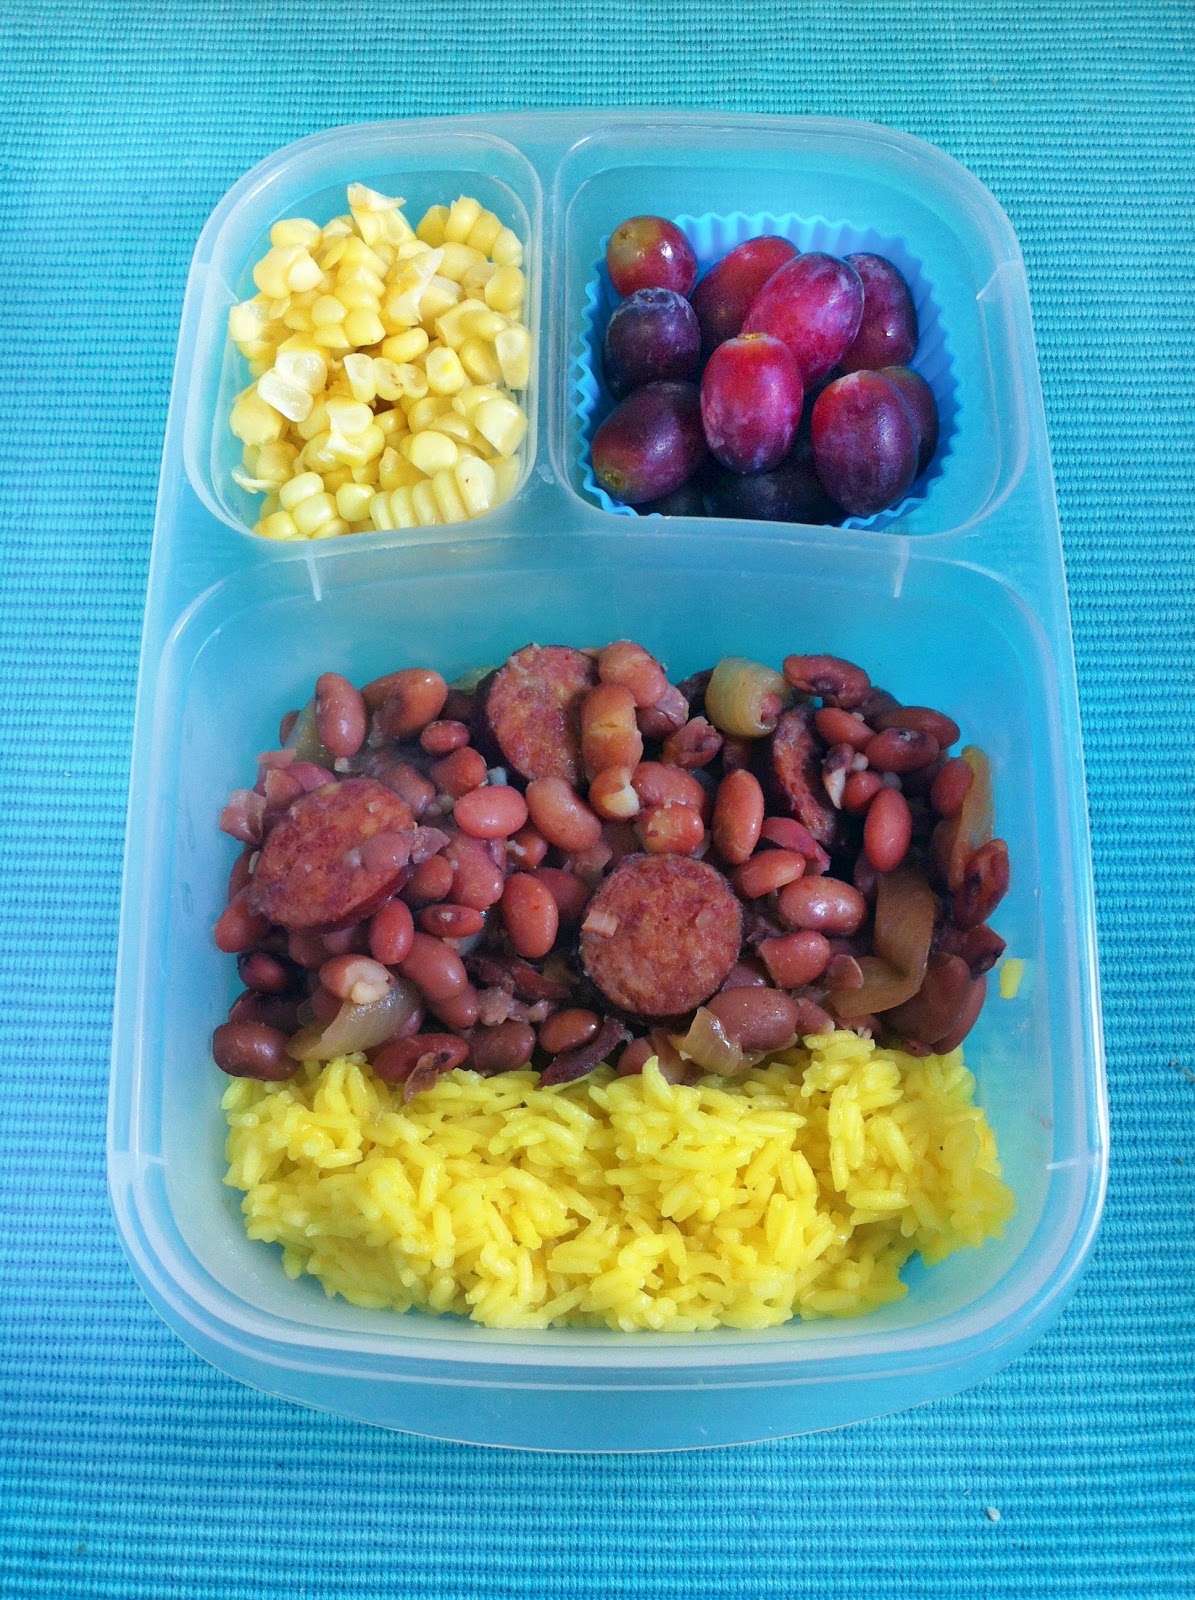 Operation: Lunch Box: Day 173 - Red Beans and Rice